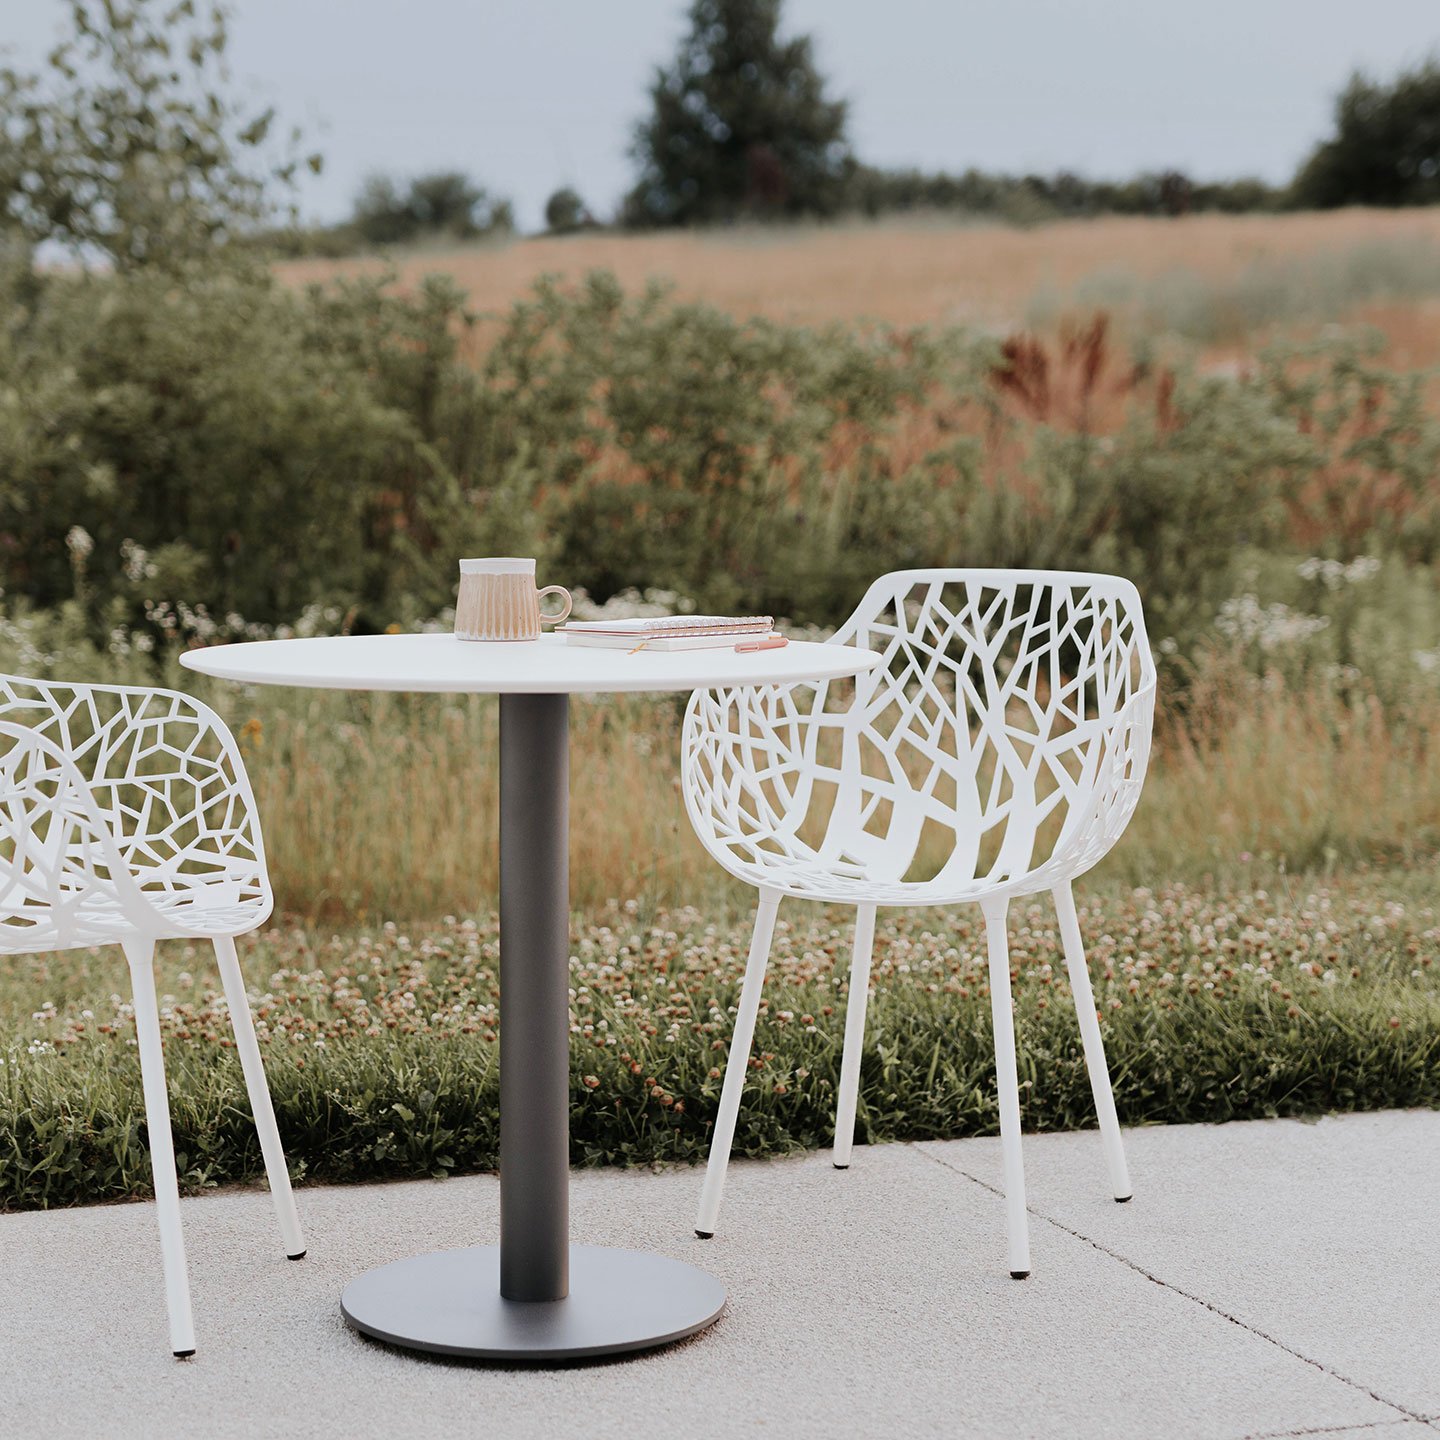 Haworth Forest chairs in open outdoor space close to nature